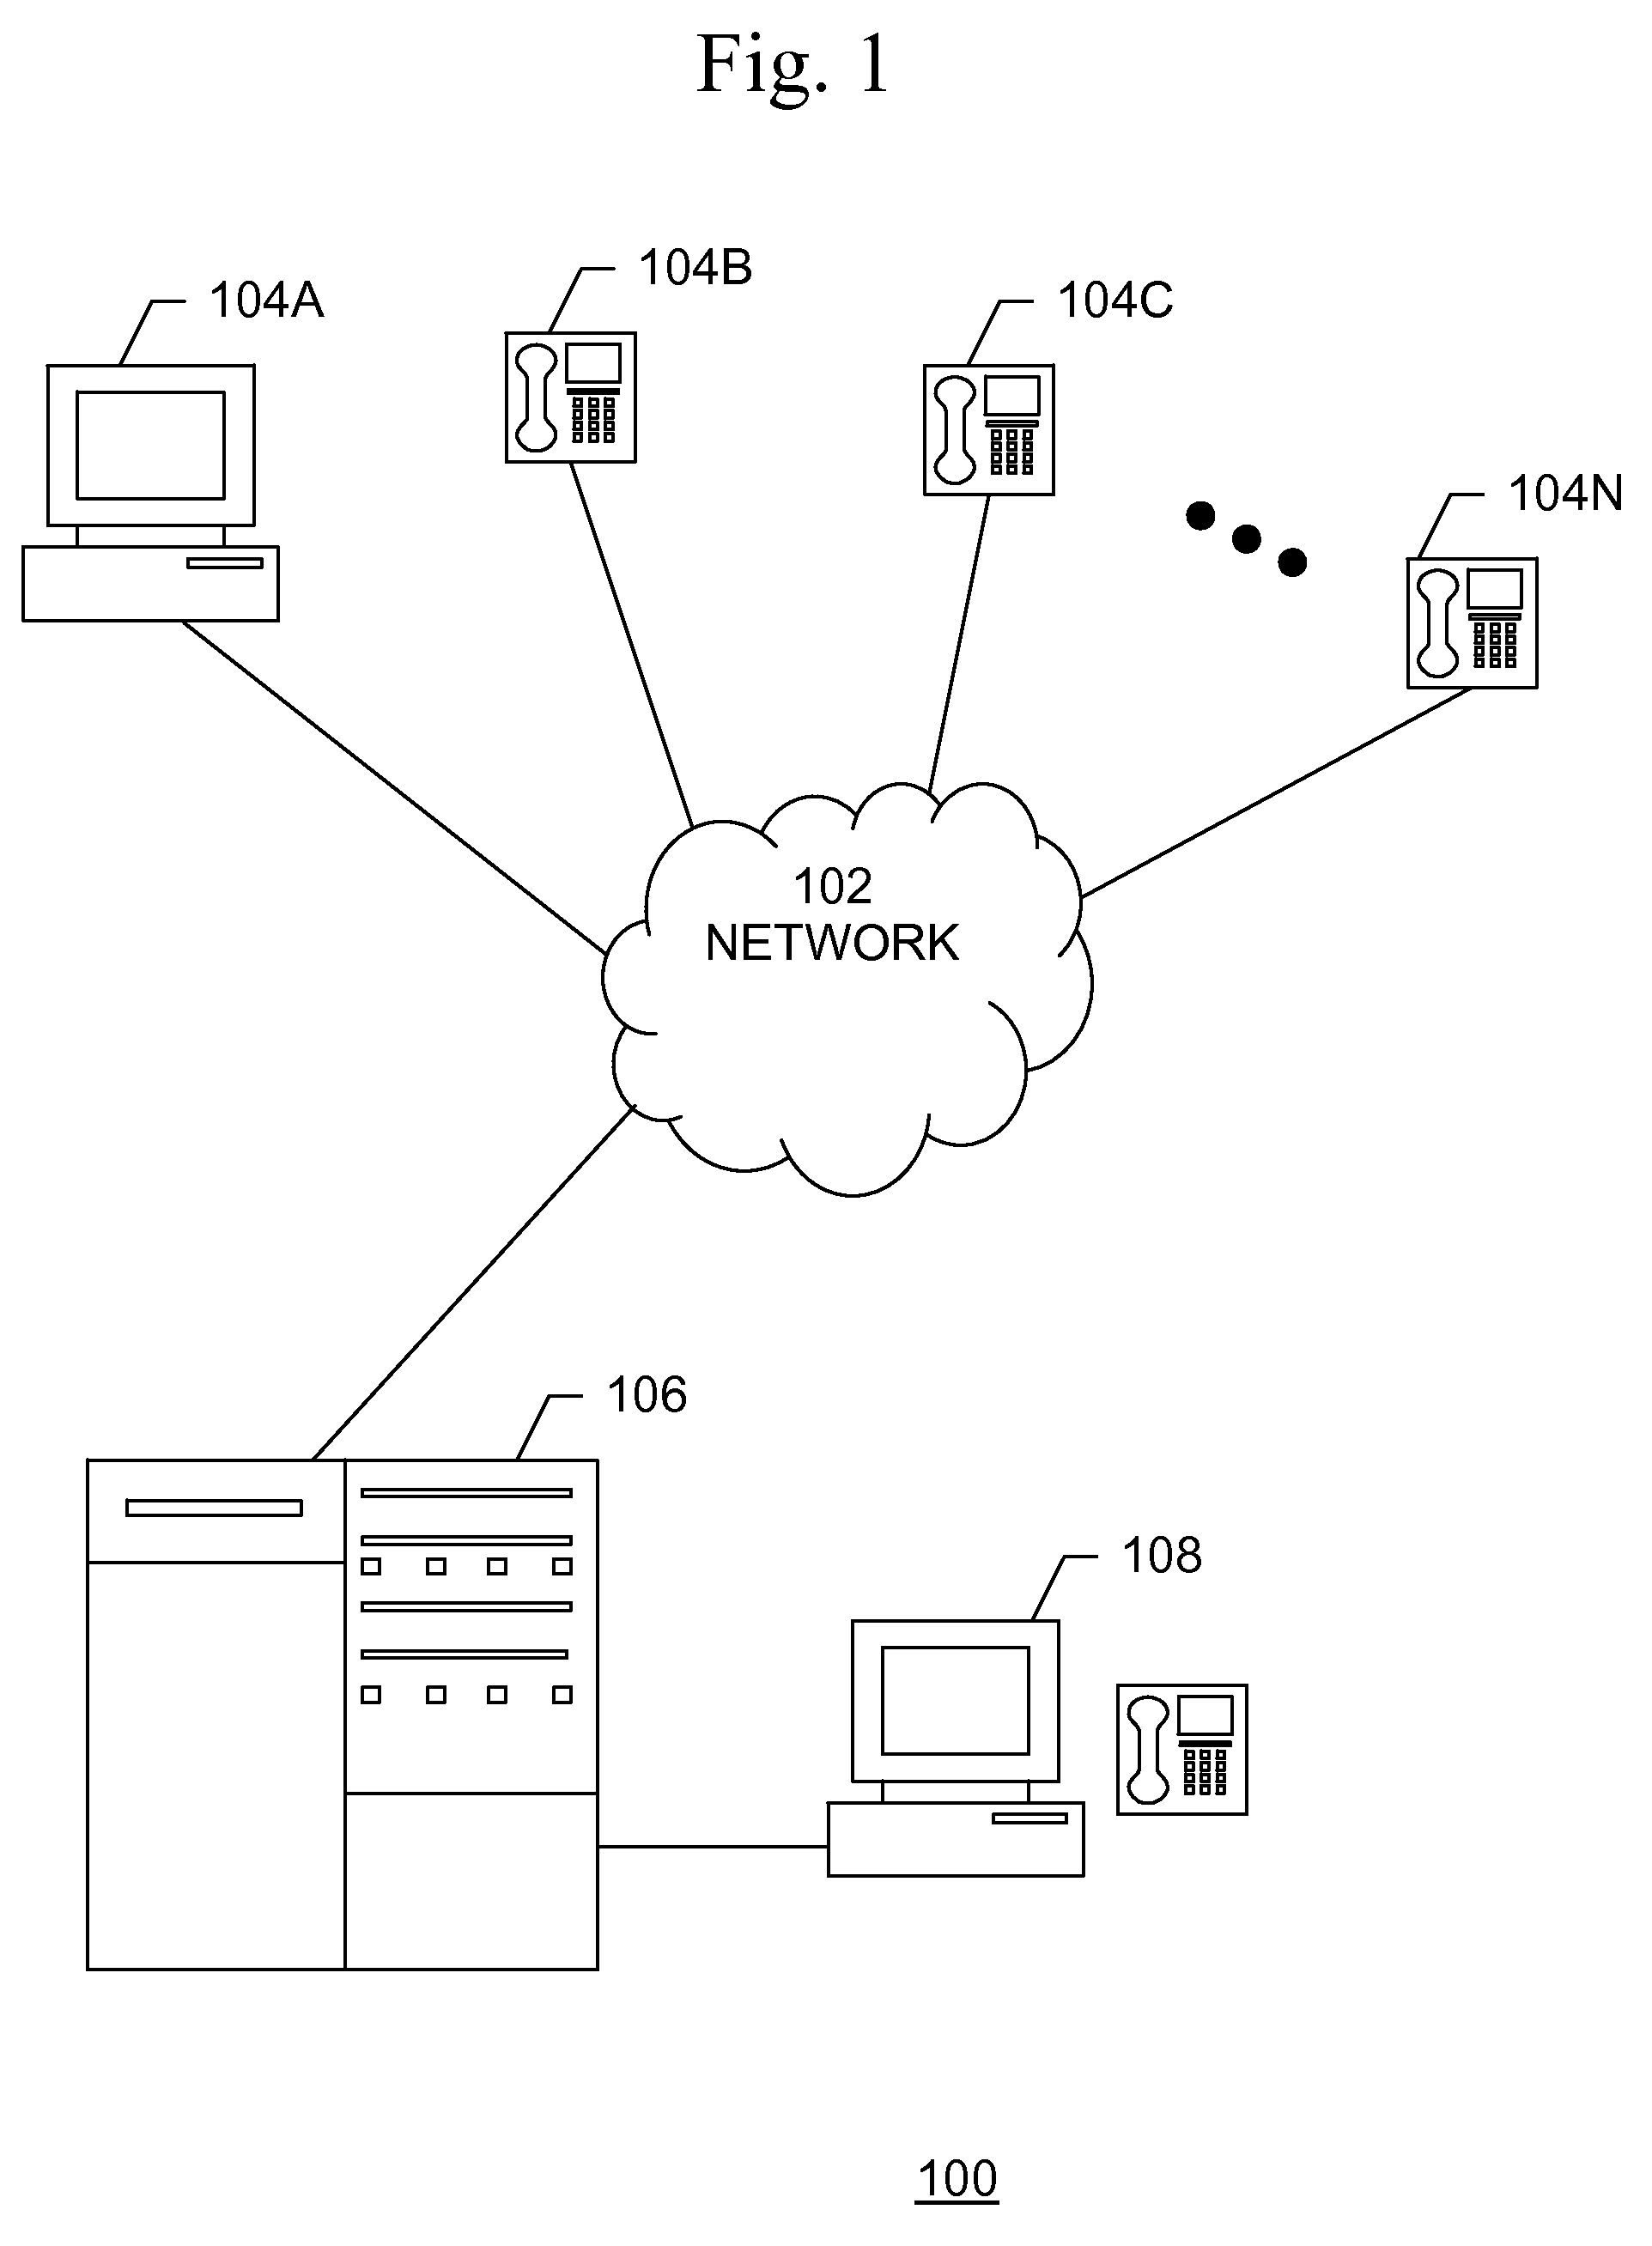 Software-based operator switchboard